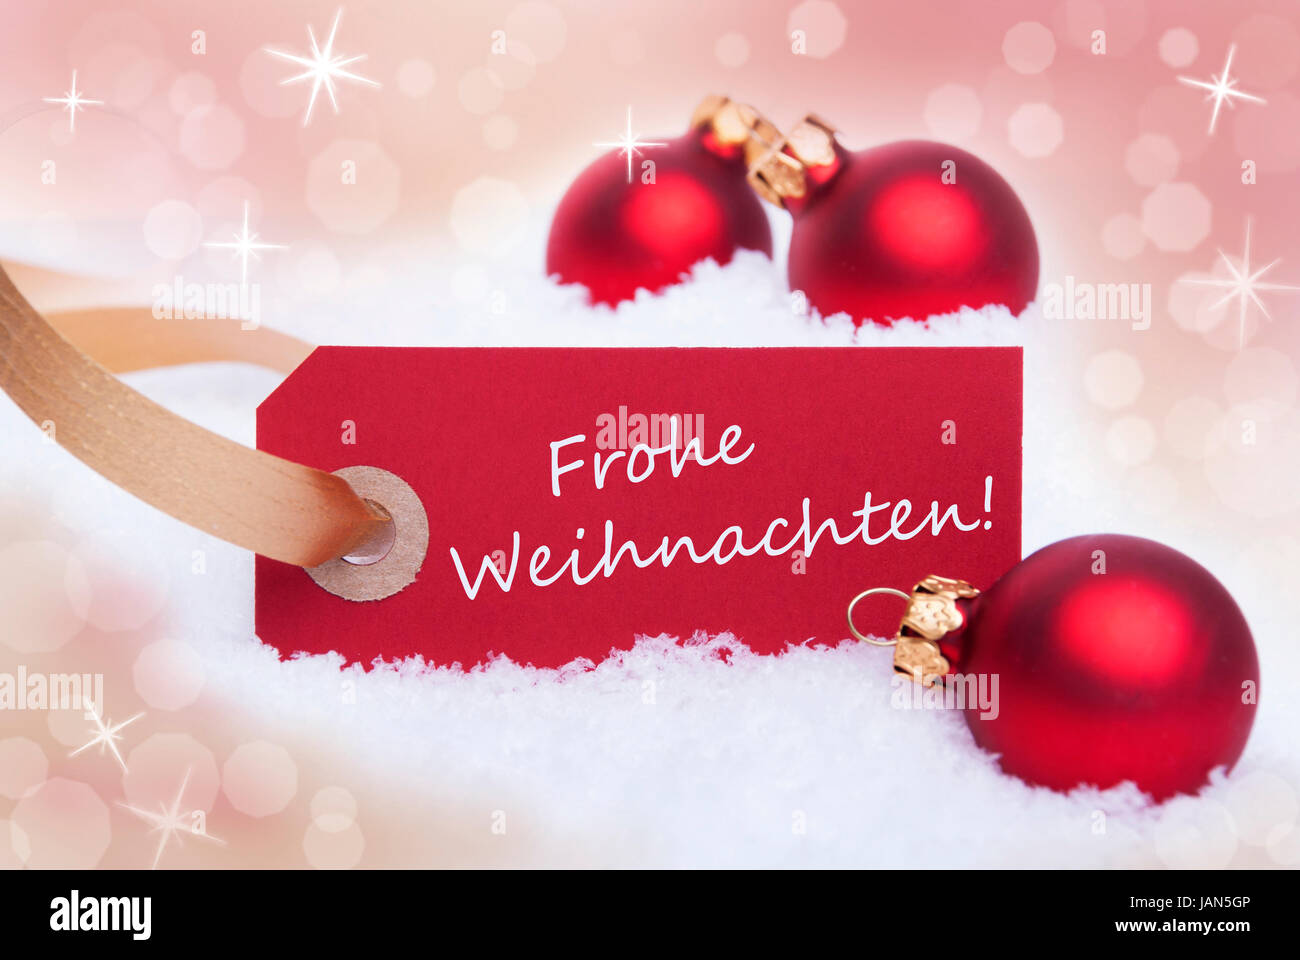 A Red Tag With the German Words Frohe Weihnachten Which Means Merry Christmas on it Stock Photo